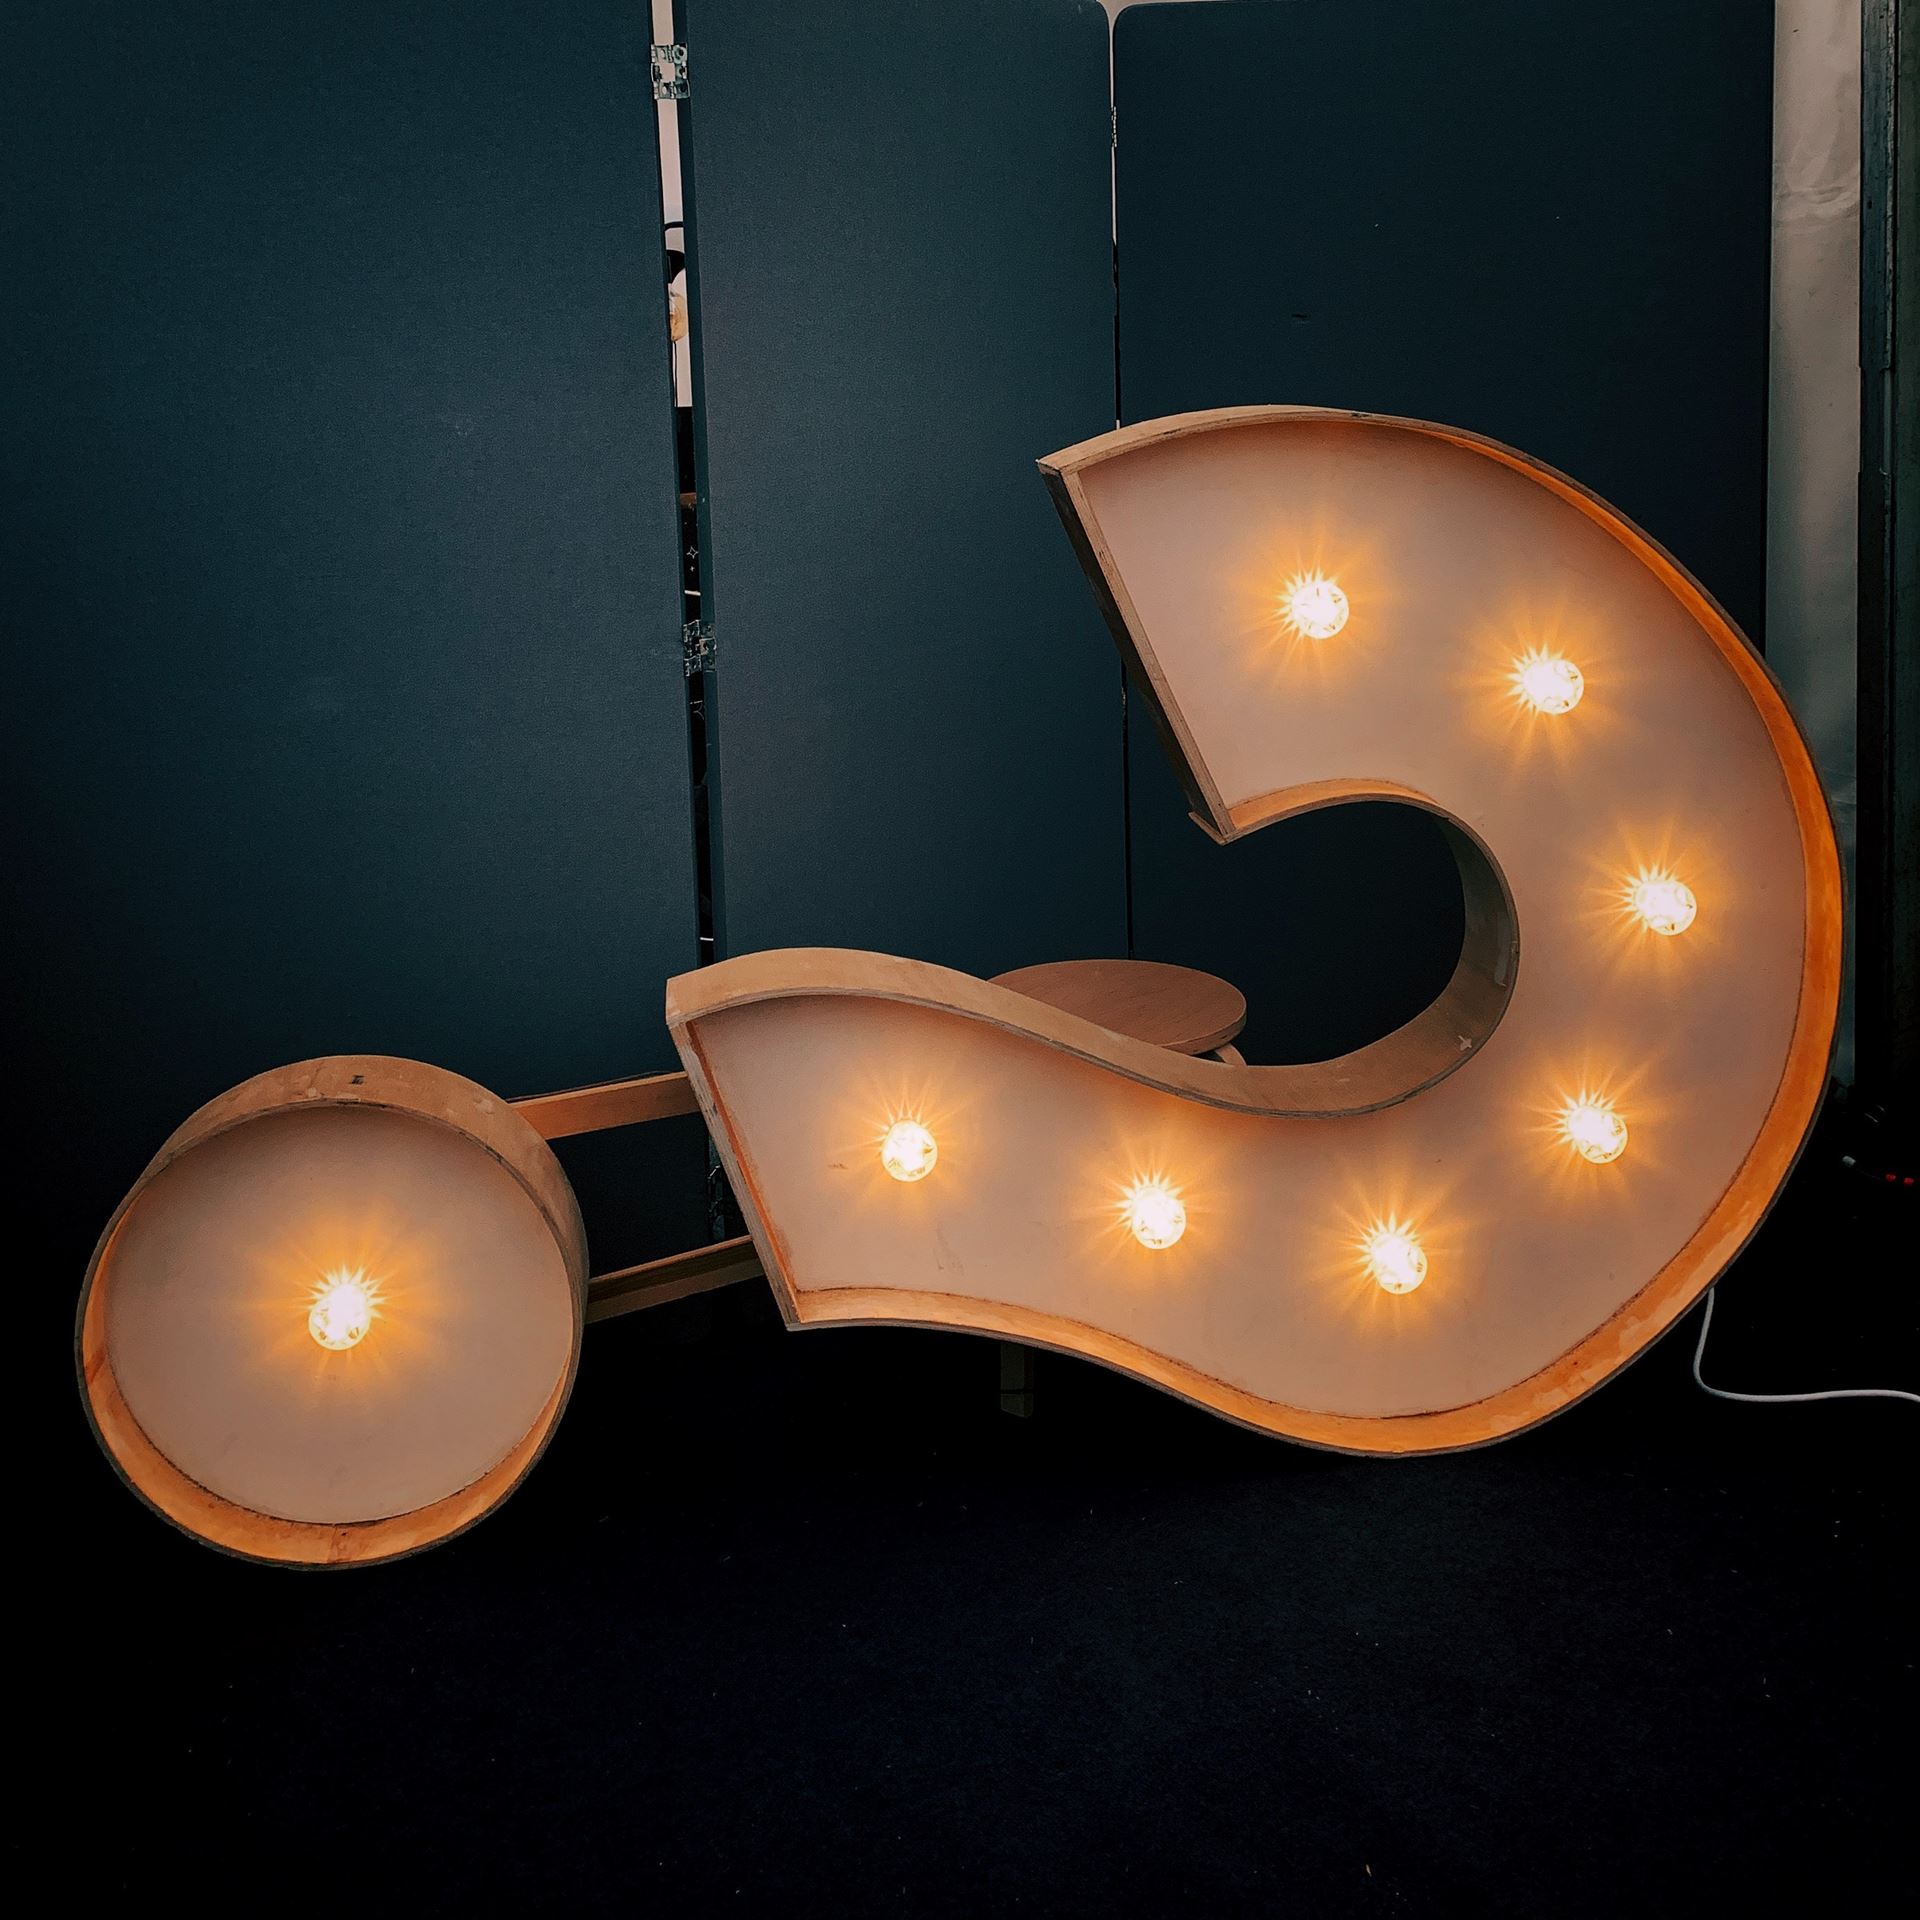 a question mark light on its side